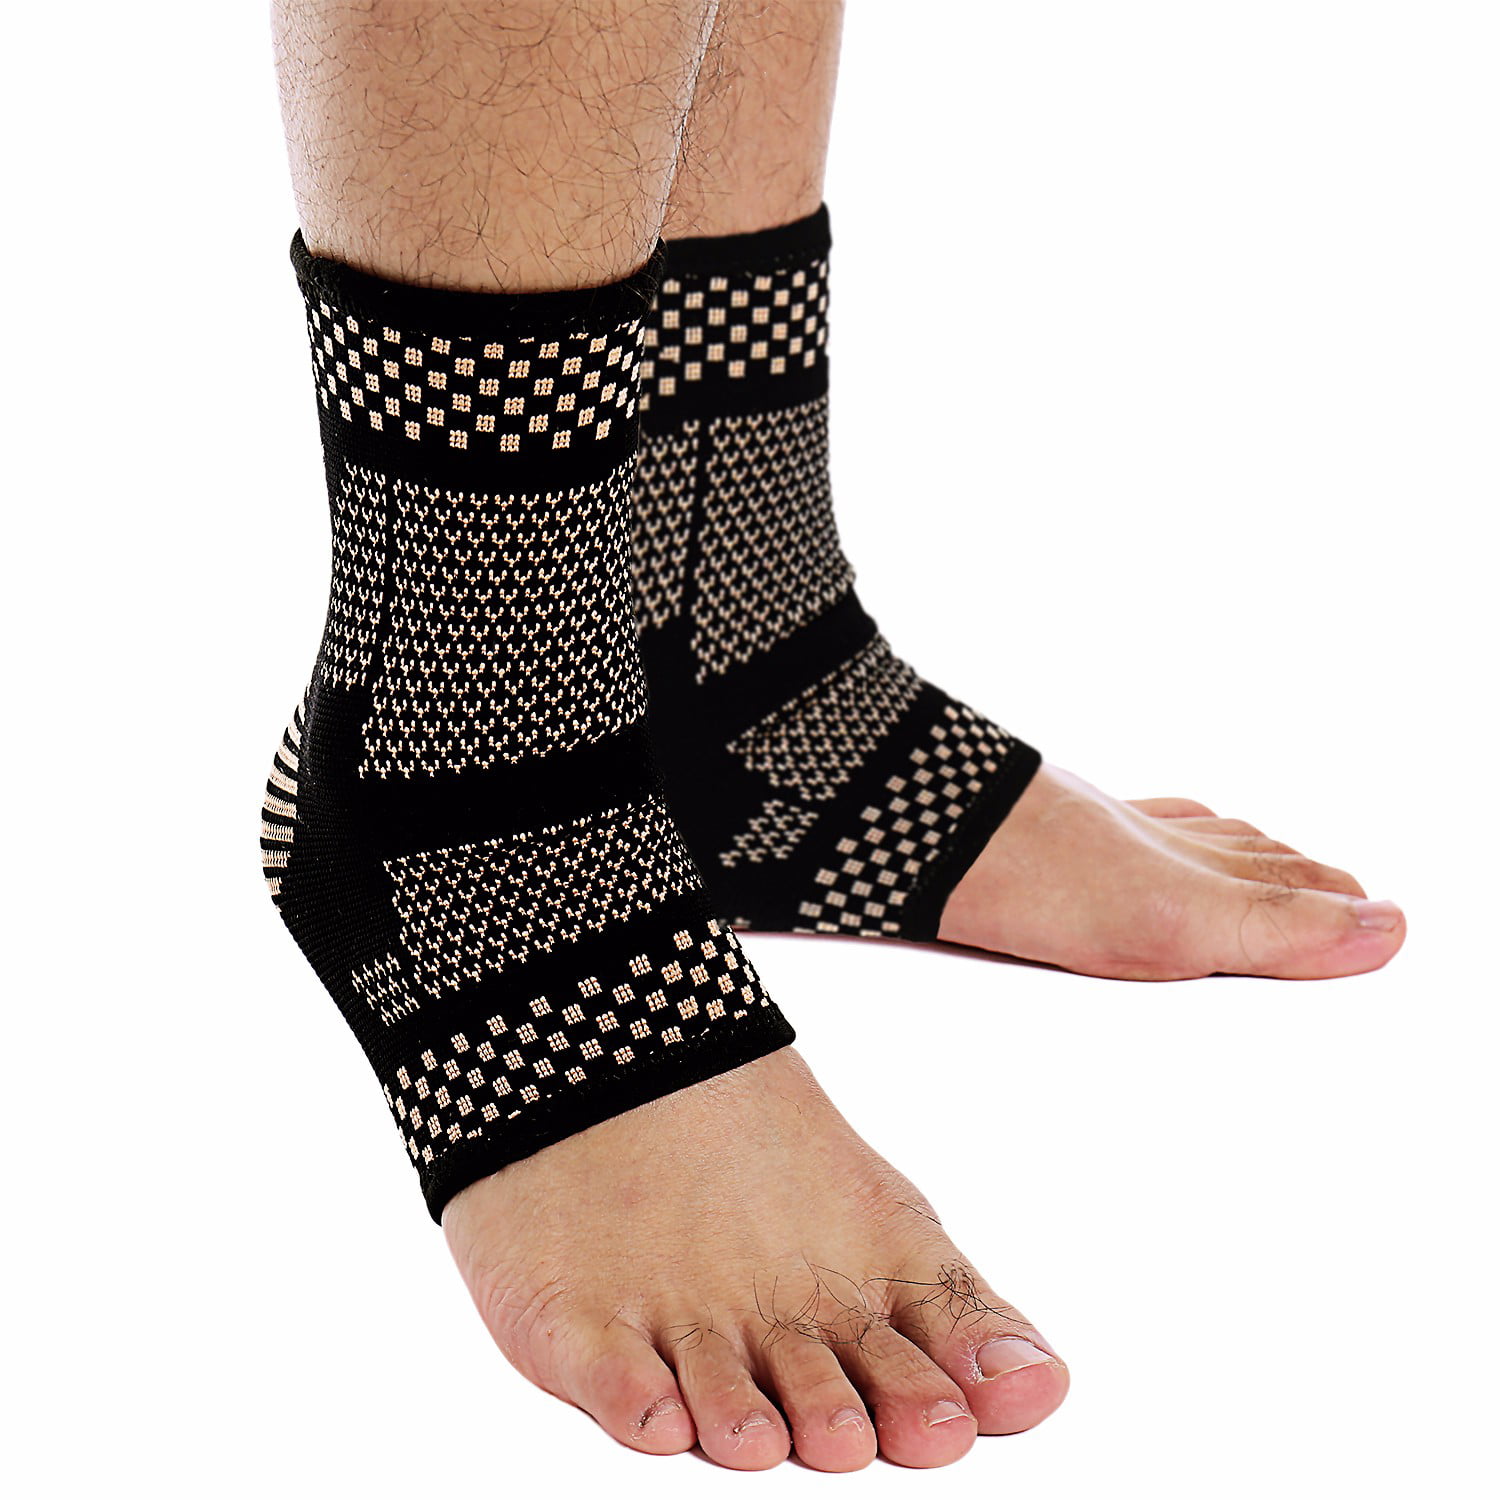 FITTOO Copper Ankle Support Infused Plantar Fasciitis Socks for Arch